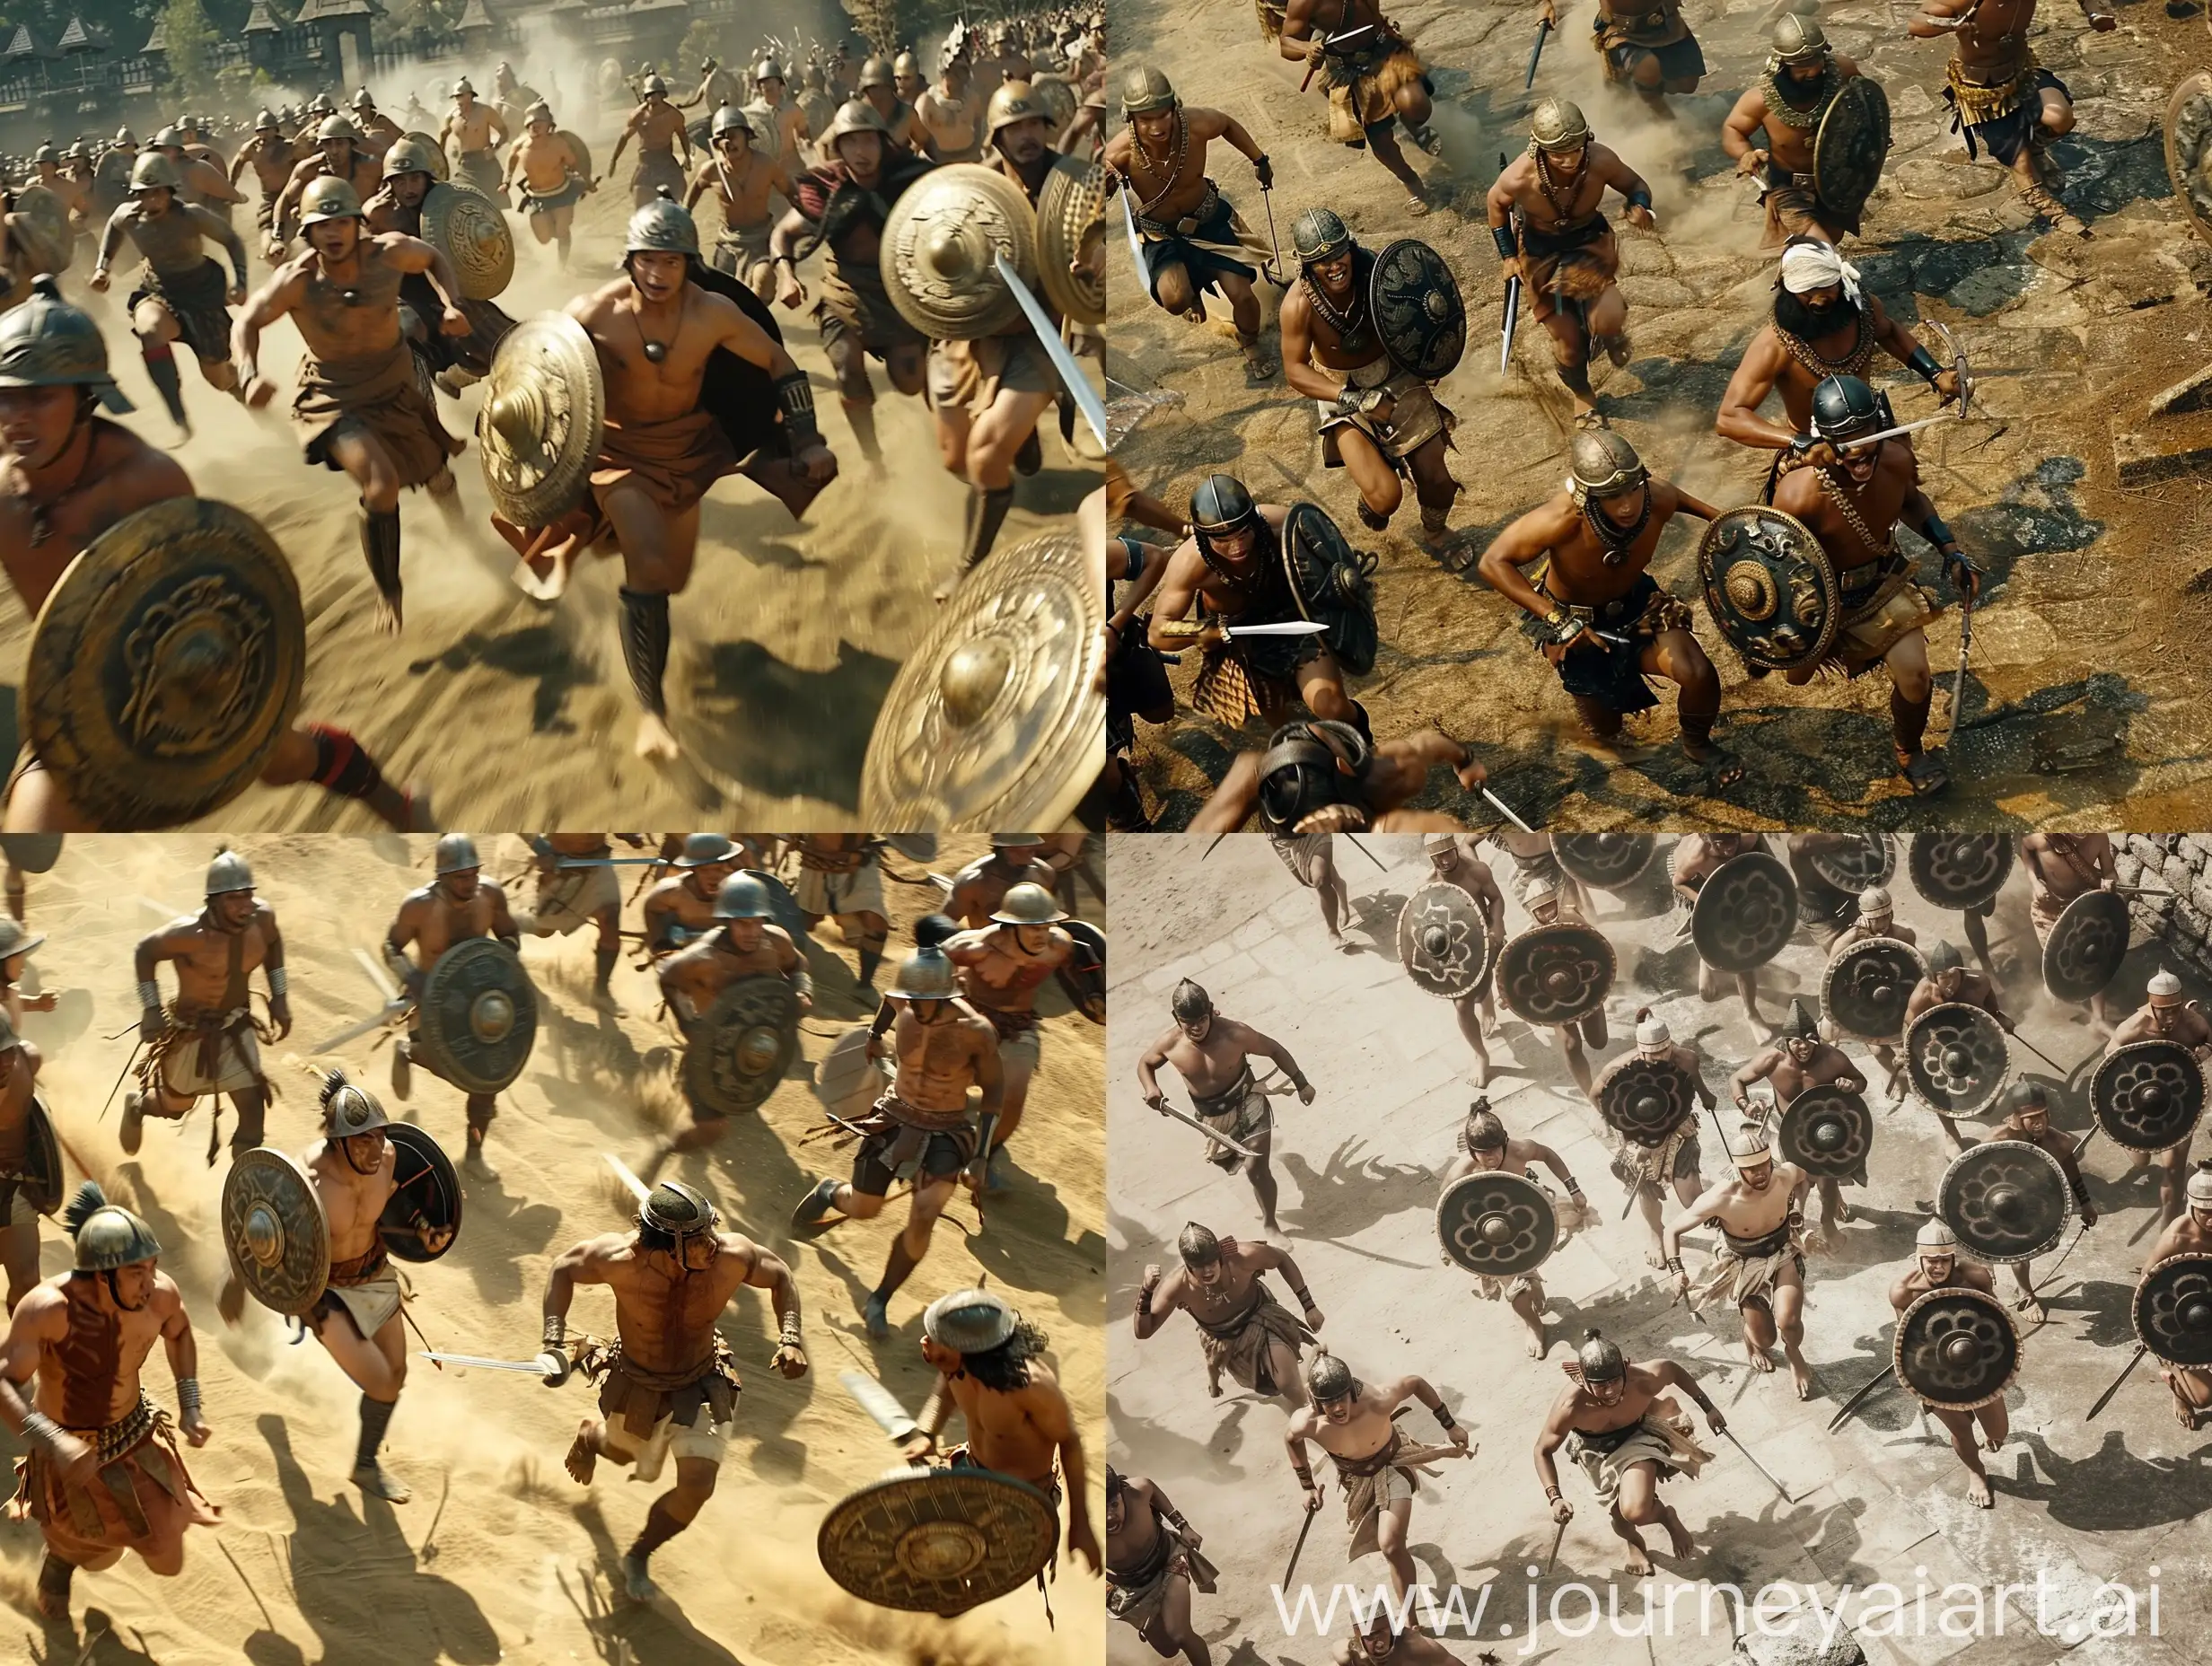 movie scene, from above view, troops of Majapahit soldiers running to fight, wearing full war equipment, without shirts, carrying shields and swords